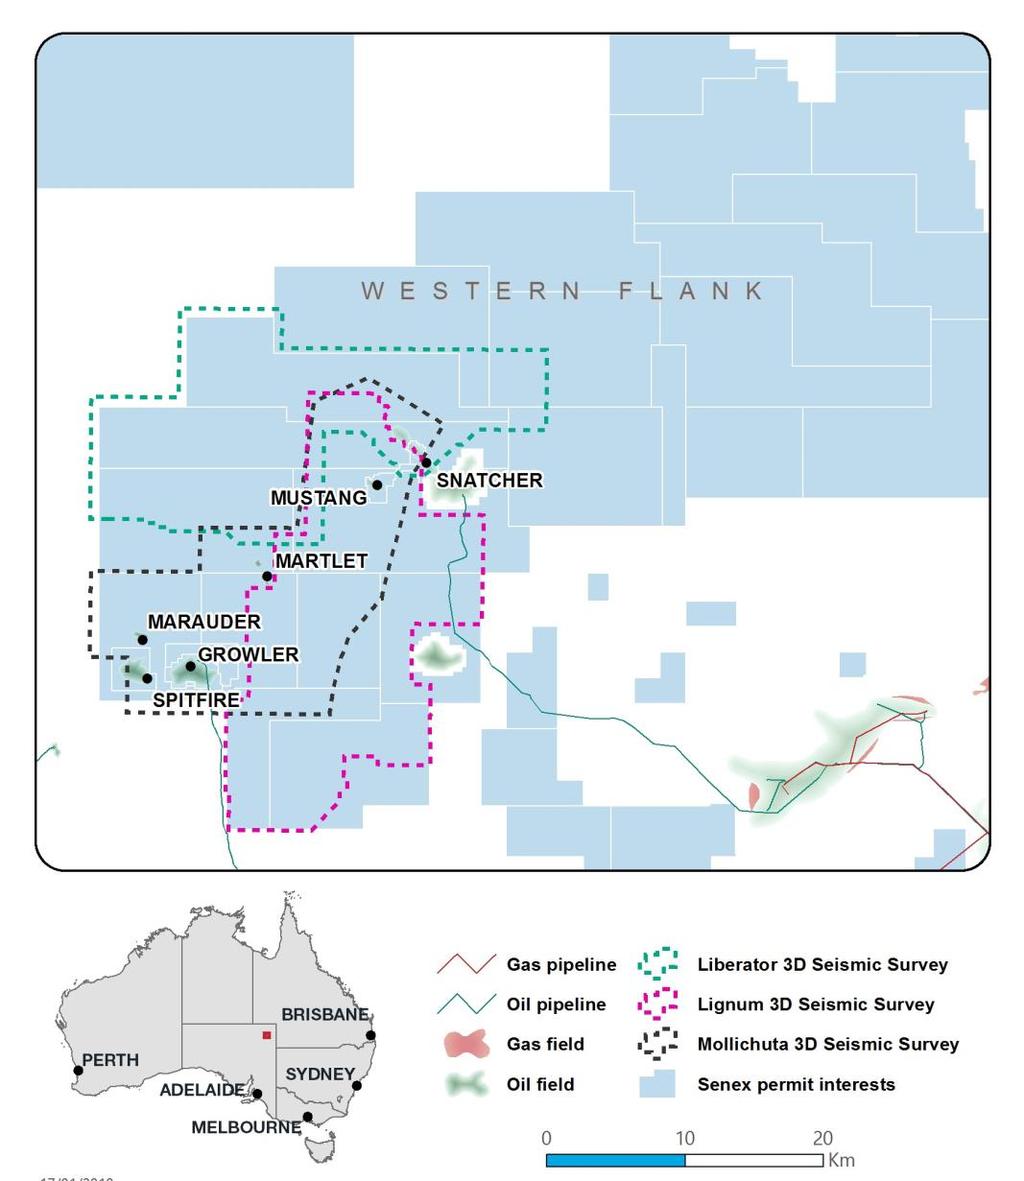 Cooper Basin oil Western flank focus 18 During H1 FY18: Strong production and cost control from base oil portfolio Marauder field discovered and brought online during Q1 FY18 Liberator seismic survey